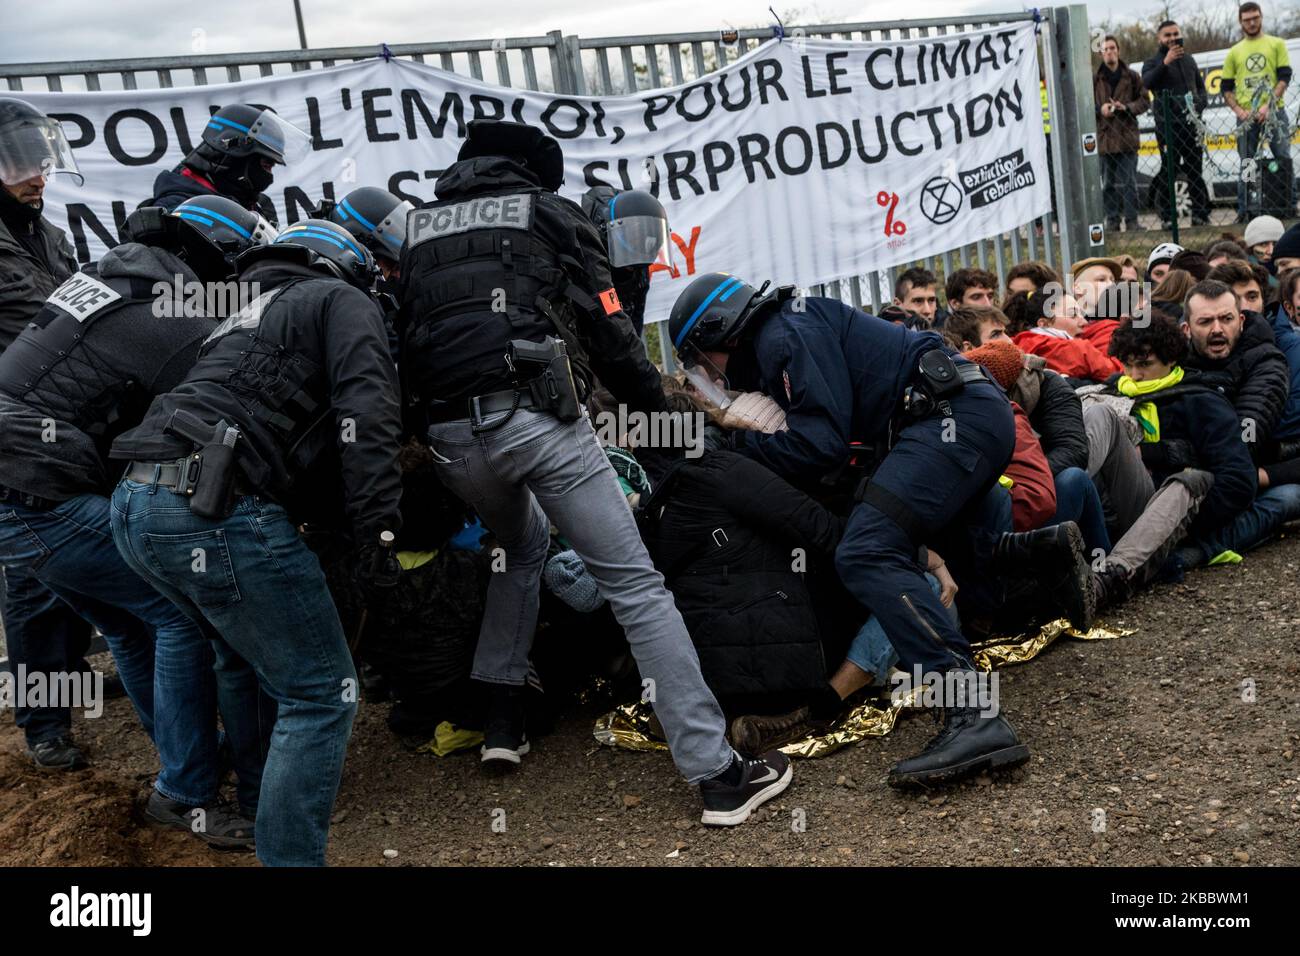 Demonstrators clash with riot police during a protest of blocking of the Amazon depot in Saint Priest, near Lyon, France, on 29 November 2019 by various environmental groups such as ANV-COP 21, Alternatiba, Attac and Extinction Rebellion, on the occasion of the mobilization day against Black Friday called Block Friday. The demonstrators were violently evacuated by the police in the middle of the morning. (Photo by Nicolas Liponne/NurPhoto) Stock Photo